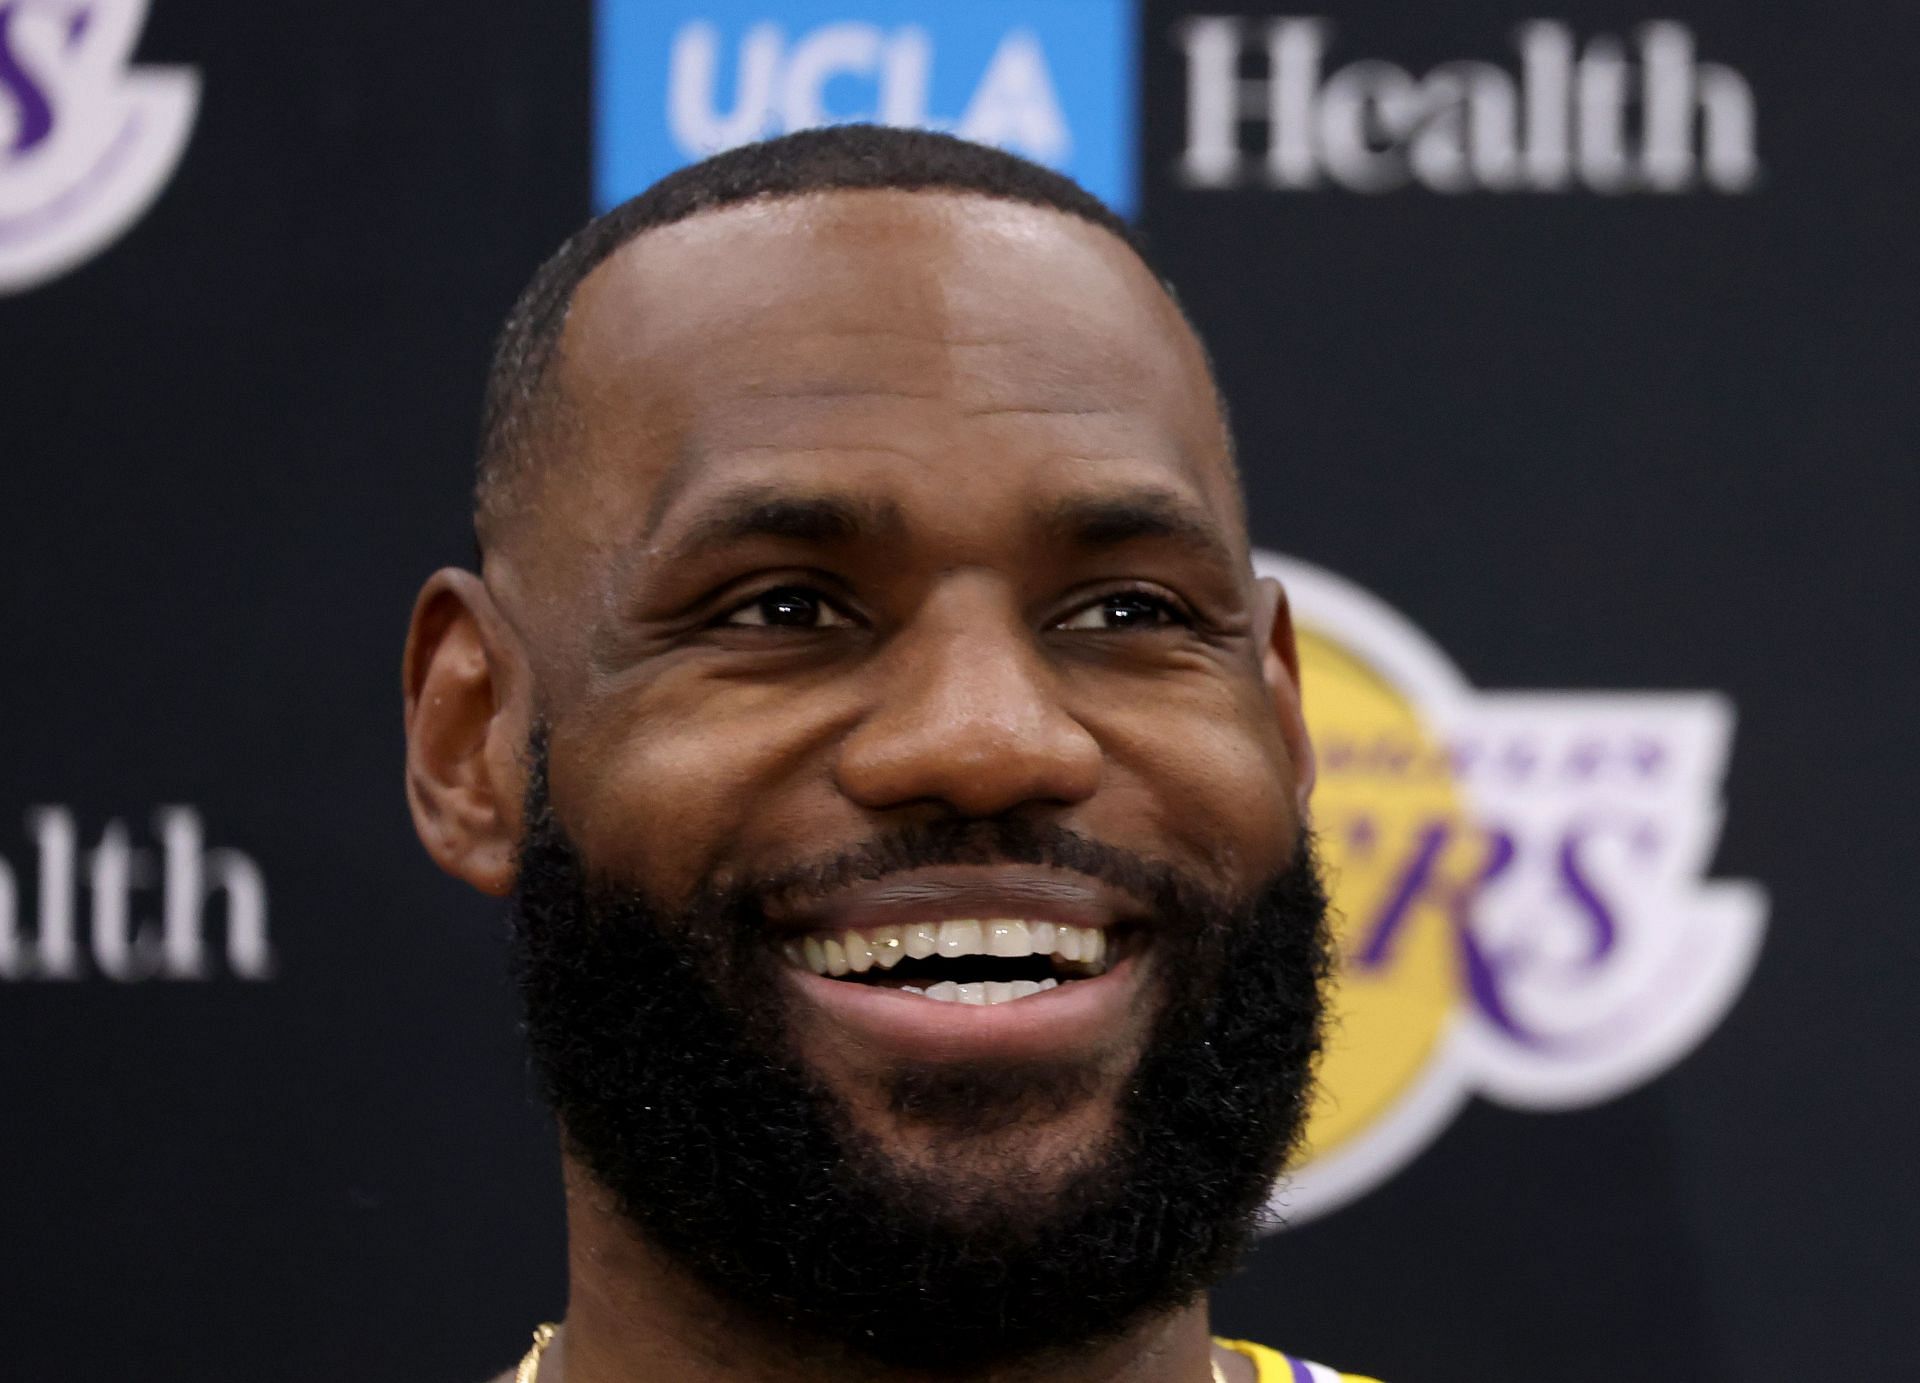 Lakers superstar LeBron James during a press conference